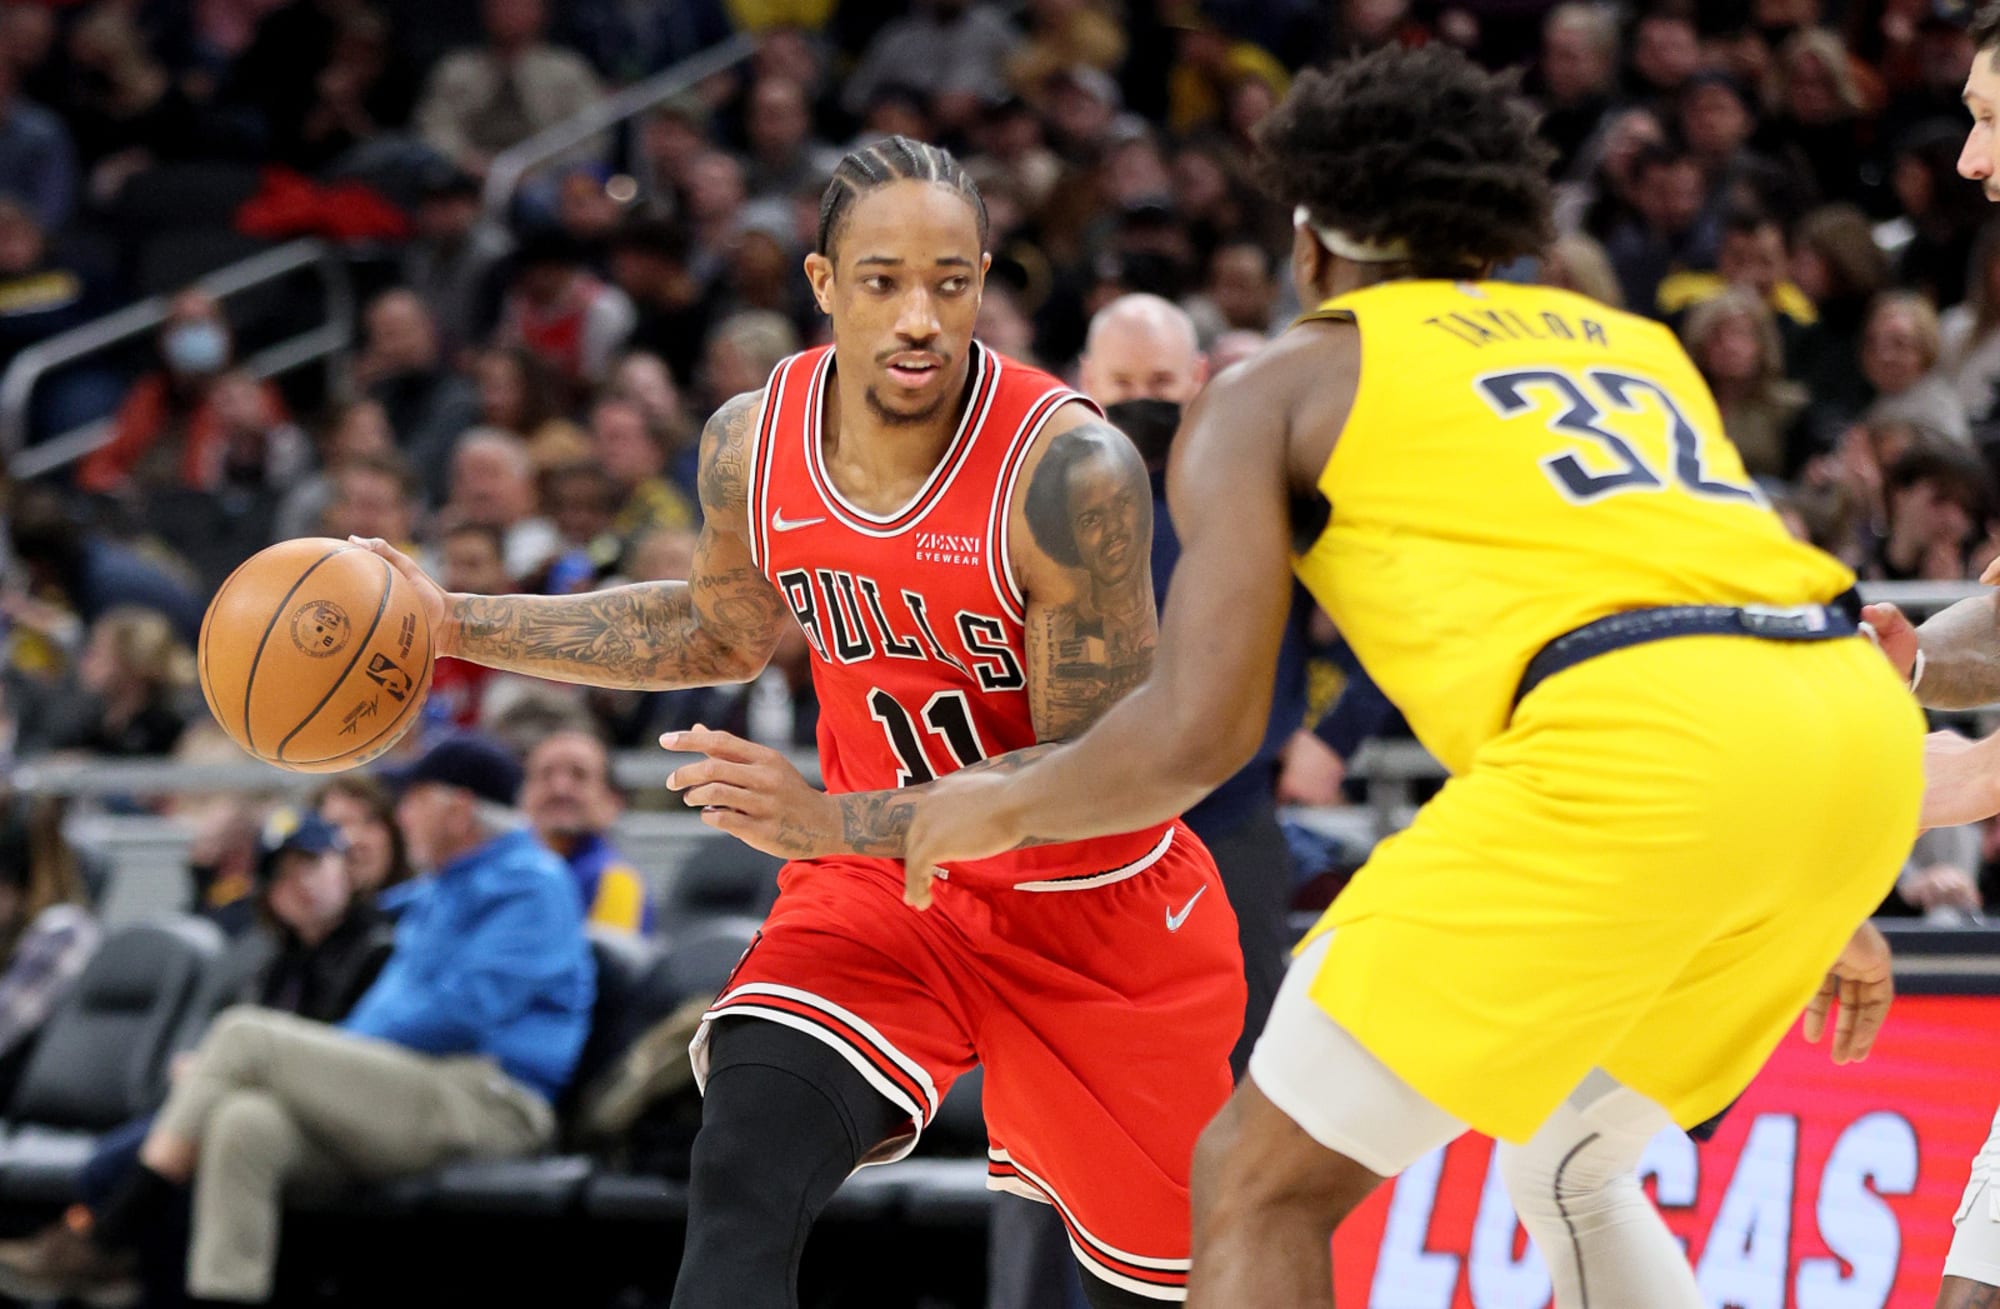 The Chicago Bulls open regular season with playoff expectations